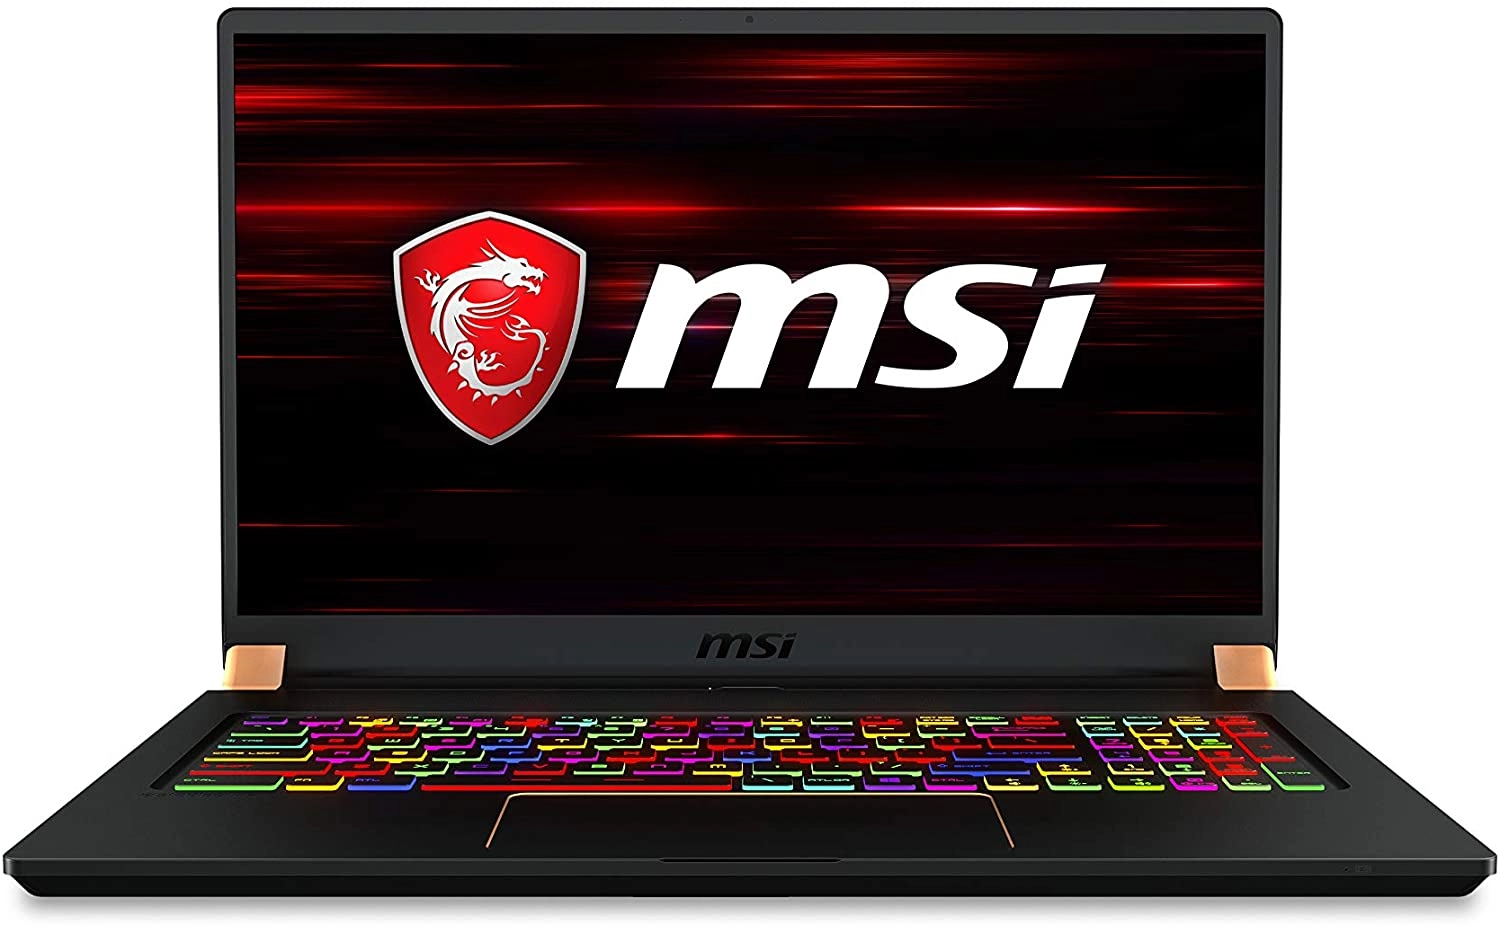 MSI GS75 Stealth 10SF-609 laptop image